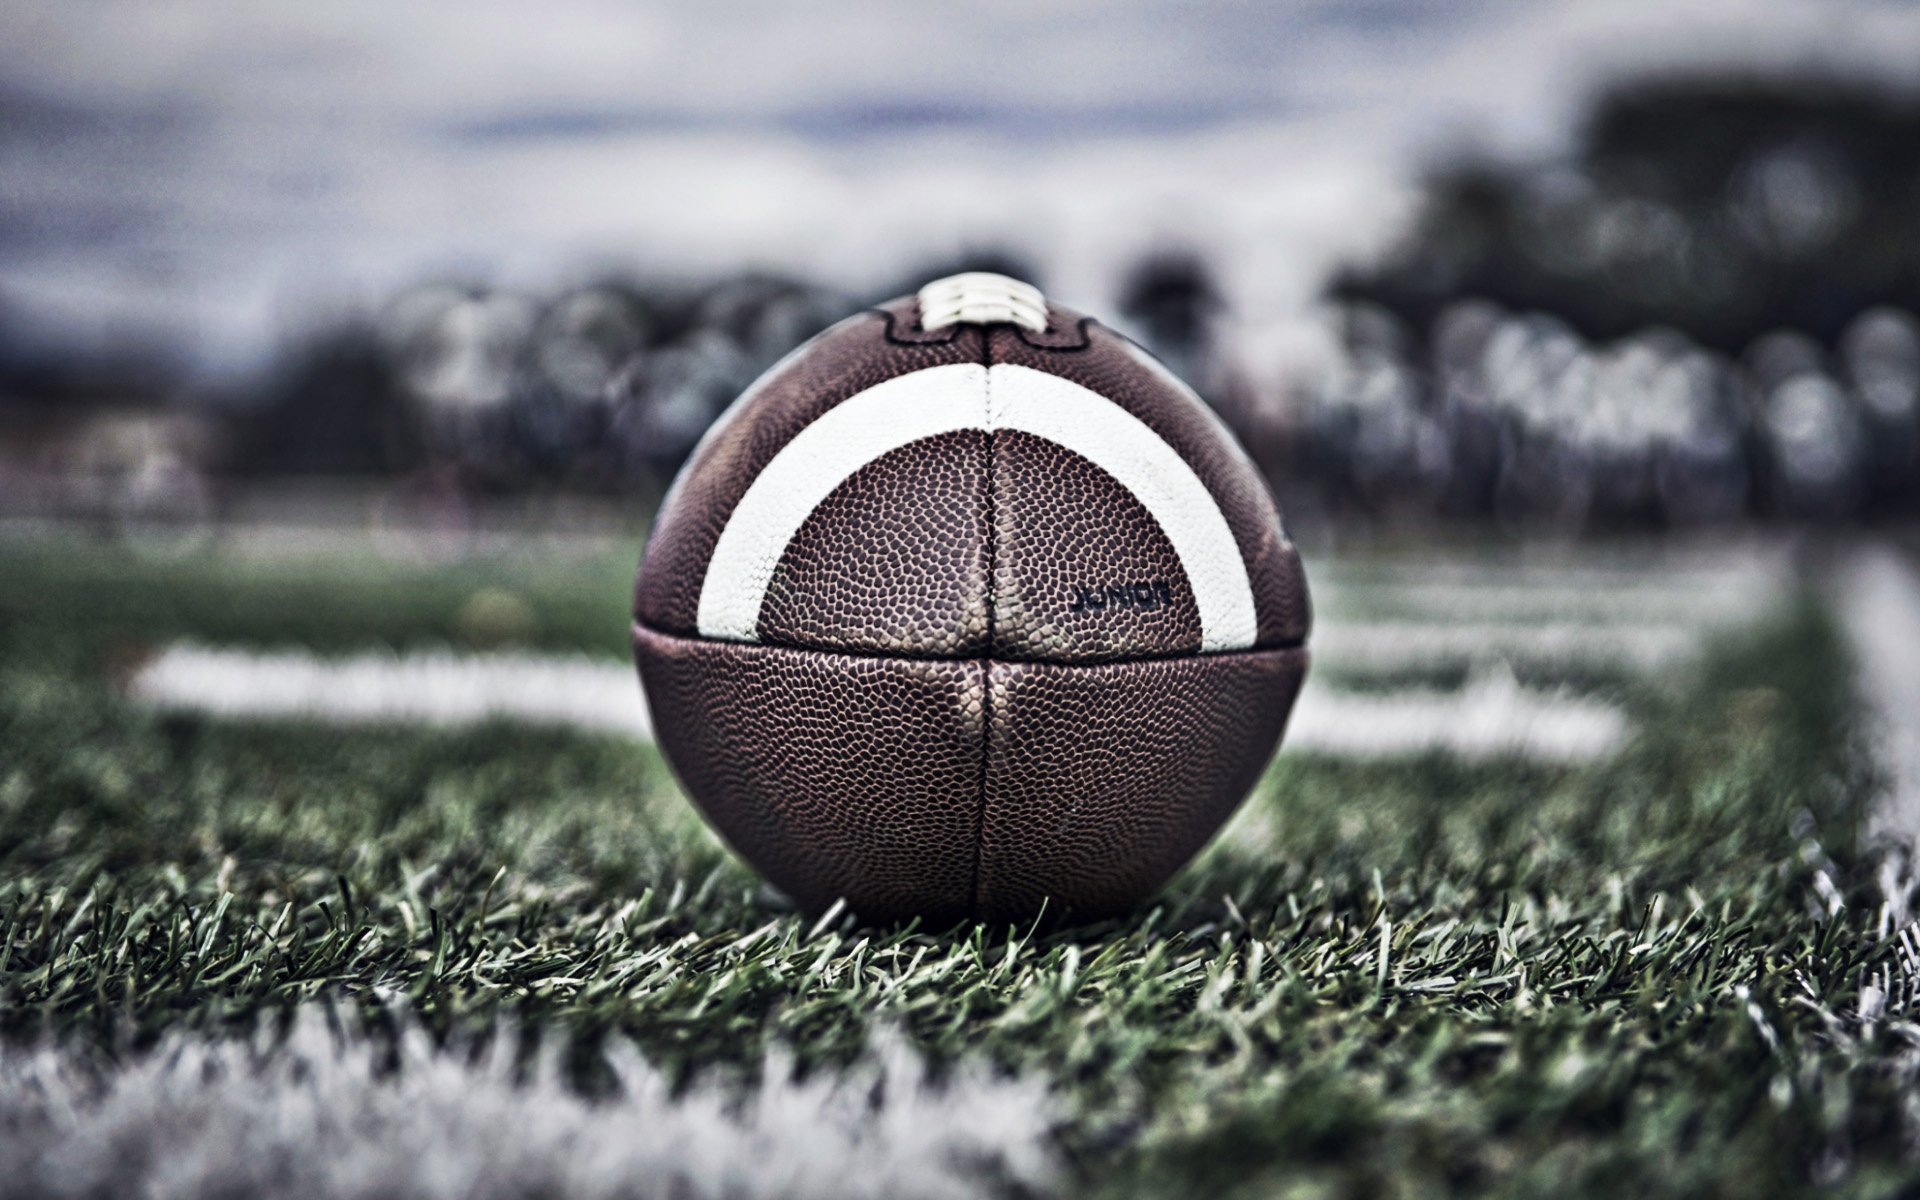 Download Wallpaper American Football Ball, Field, Stadium, Close Up, American Football For Desktop With Resolution 1920x1200. High Quality HD Picture Wallpaper